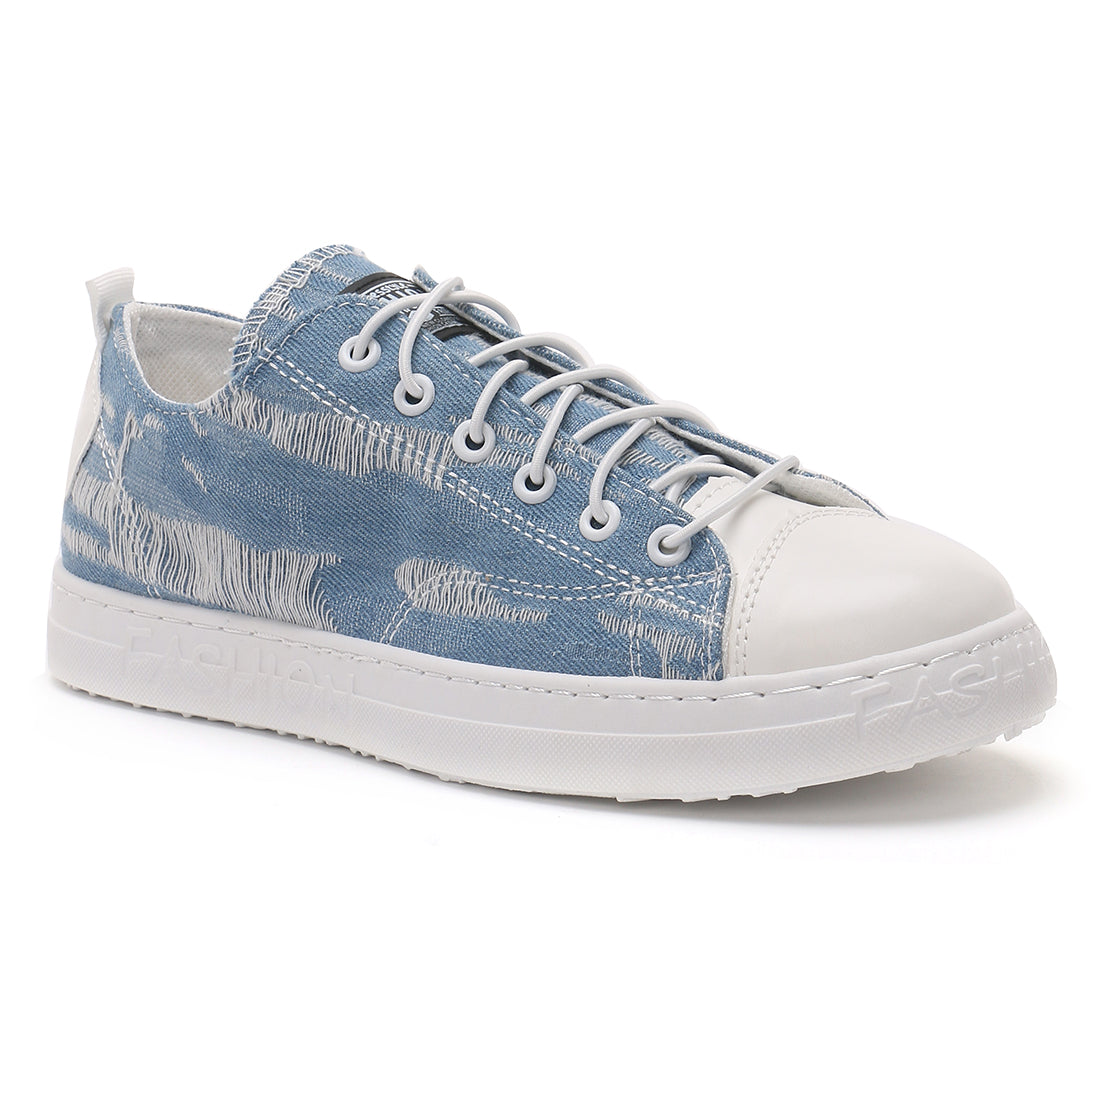 Destroyed Blue Denim Lace-Up Casual Sneakers